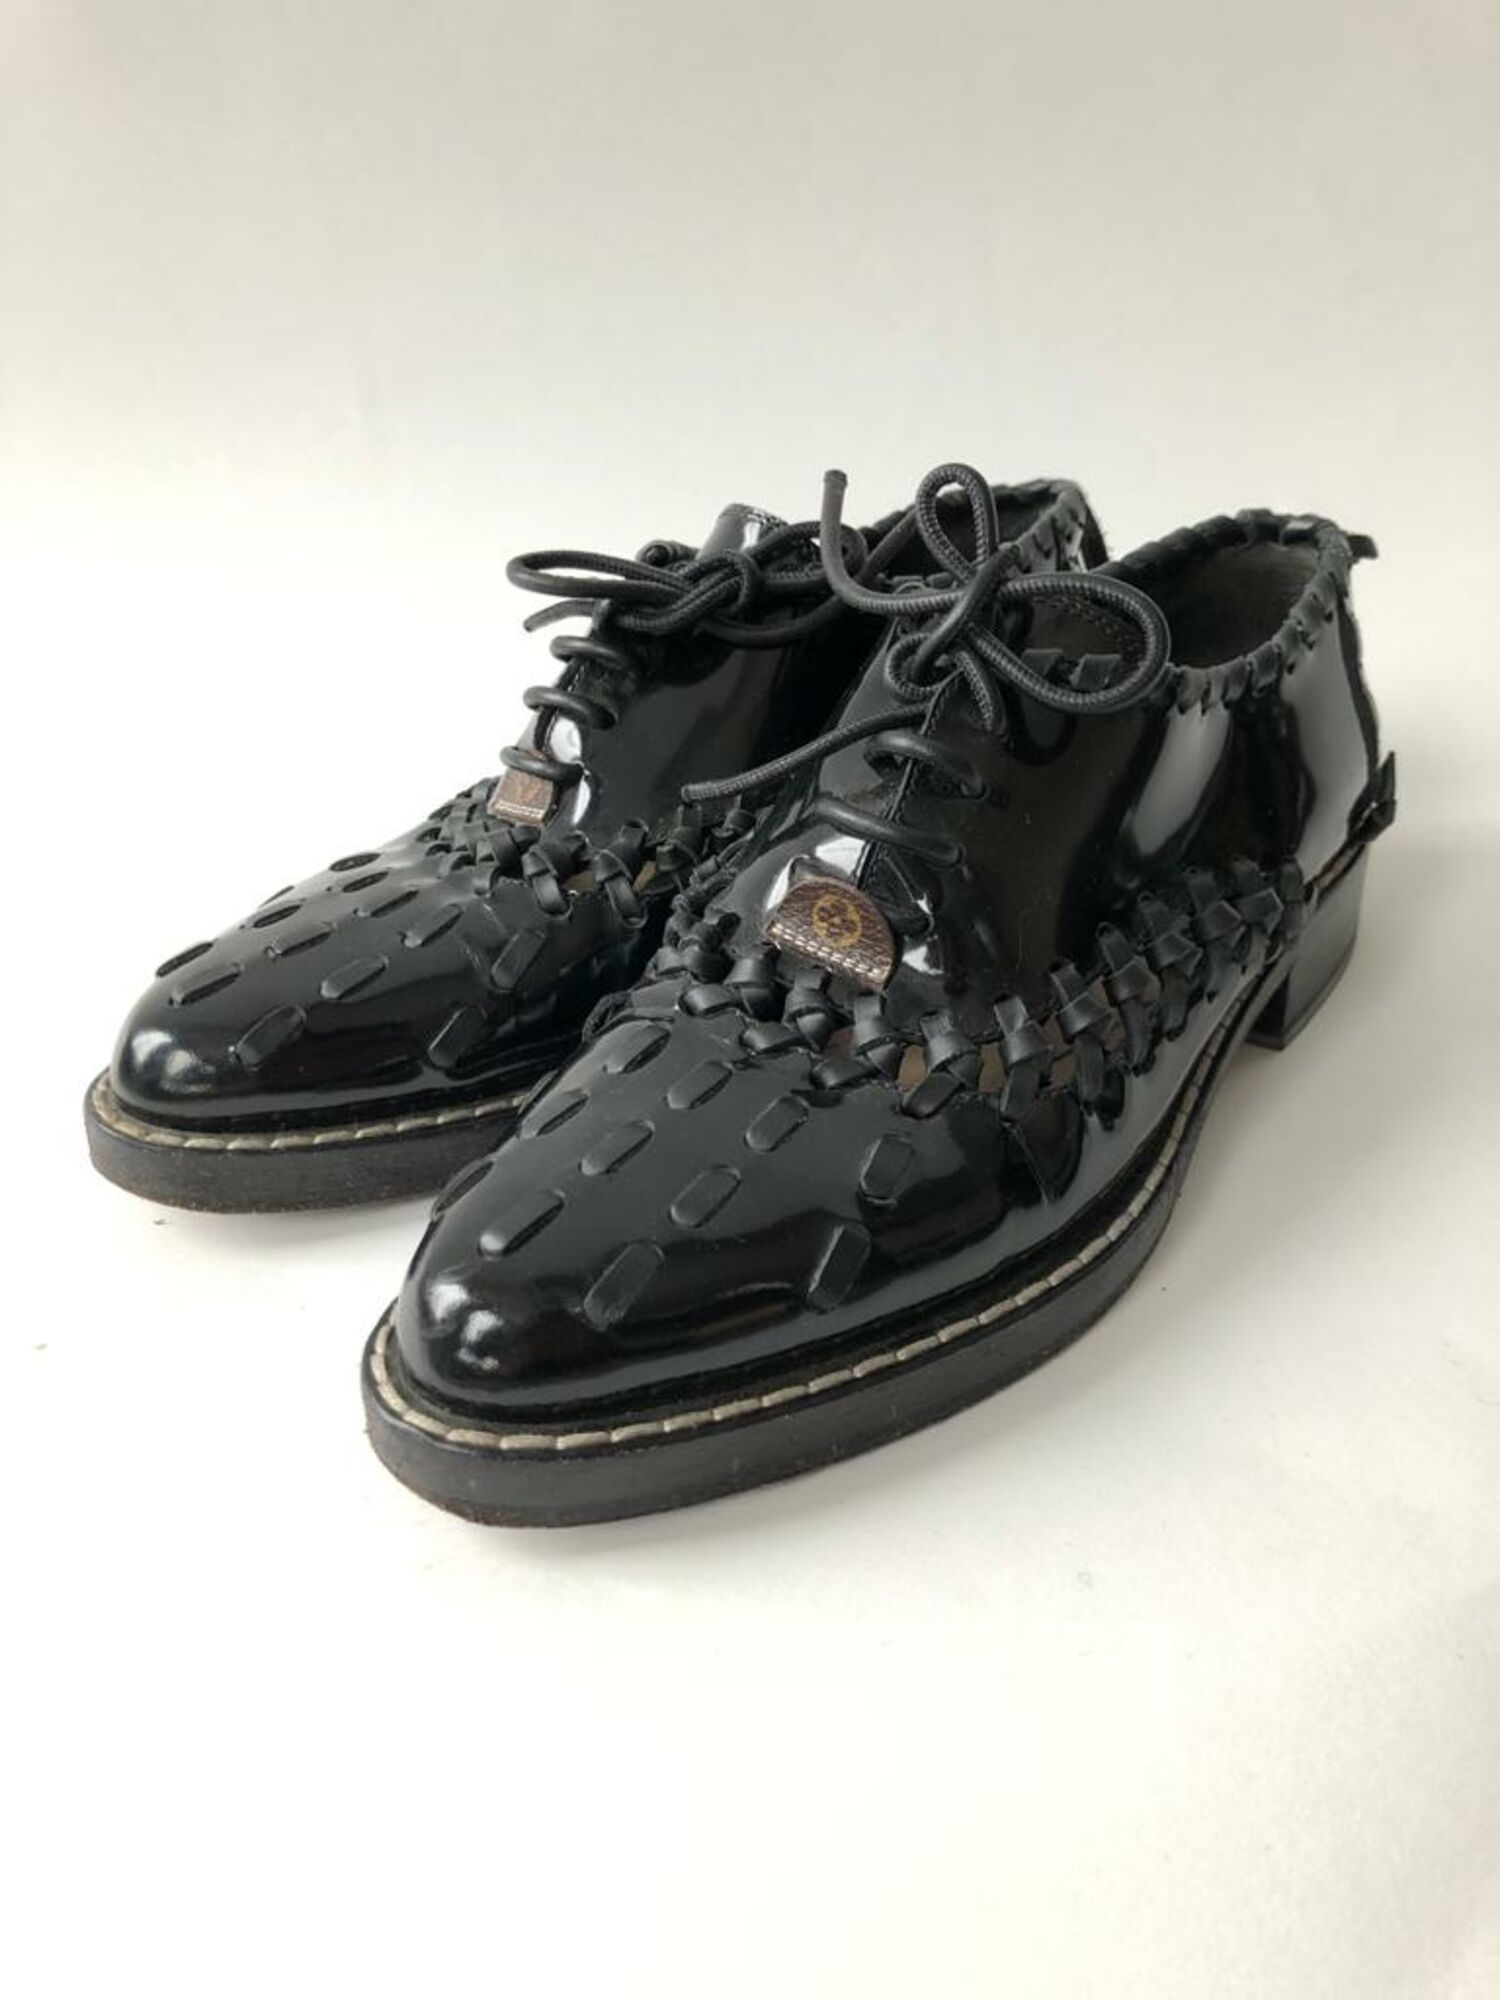 Patent Oxford Shoes Louis Vuitton - 38.5, buy pre-owned at 889 EUR